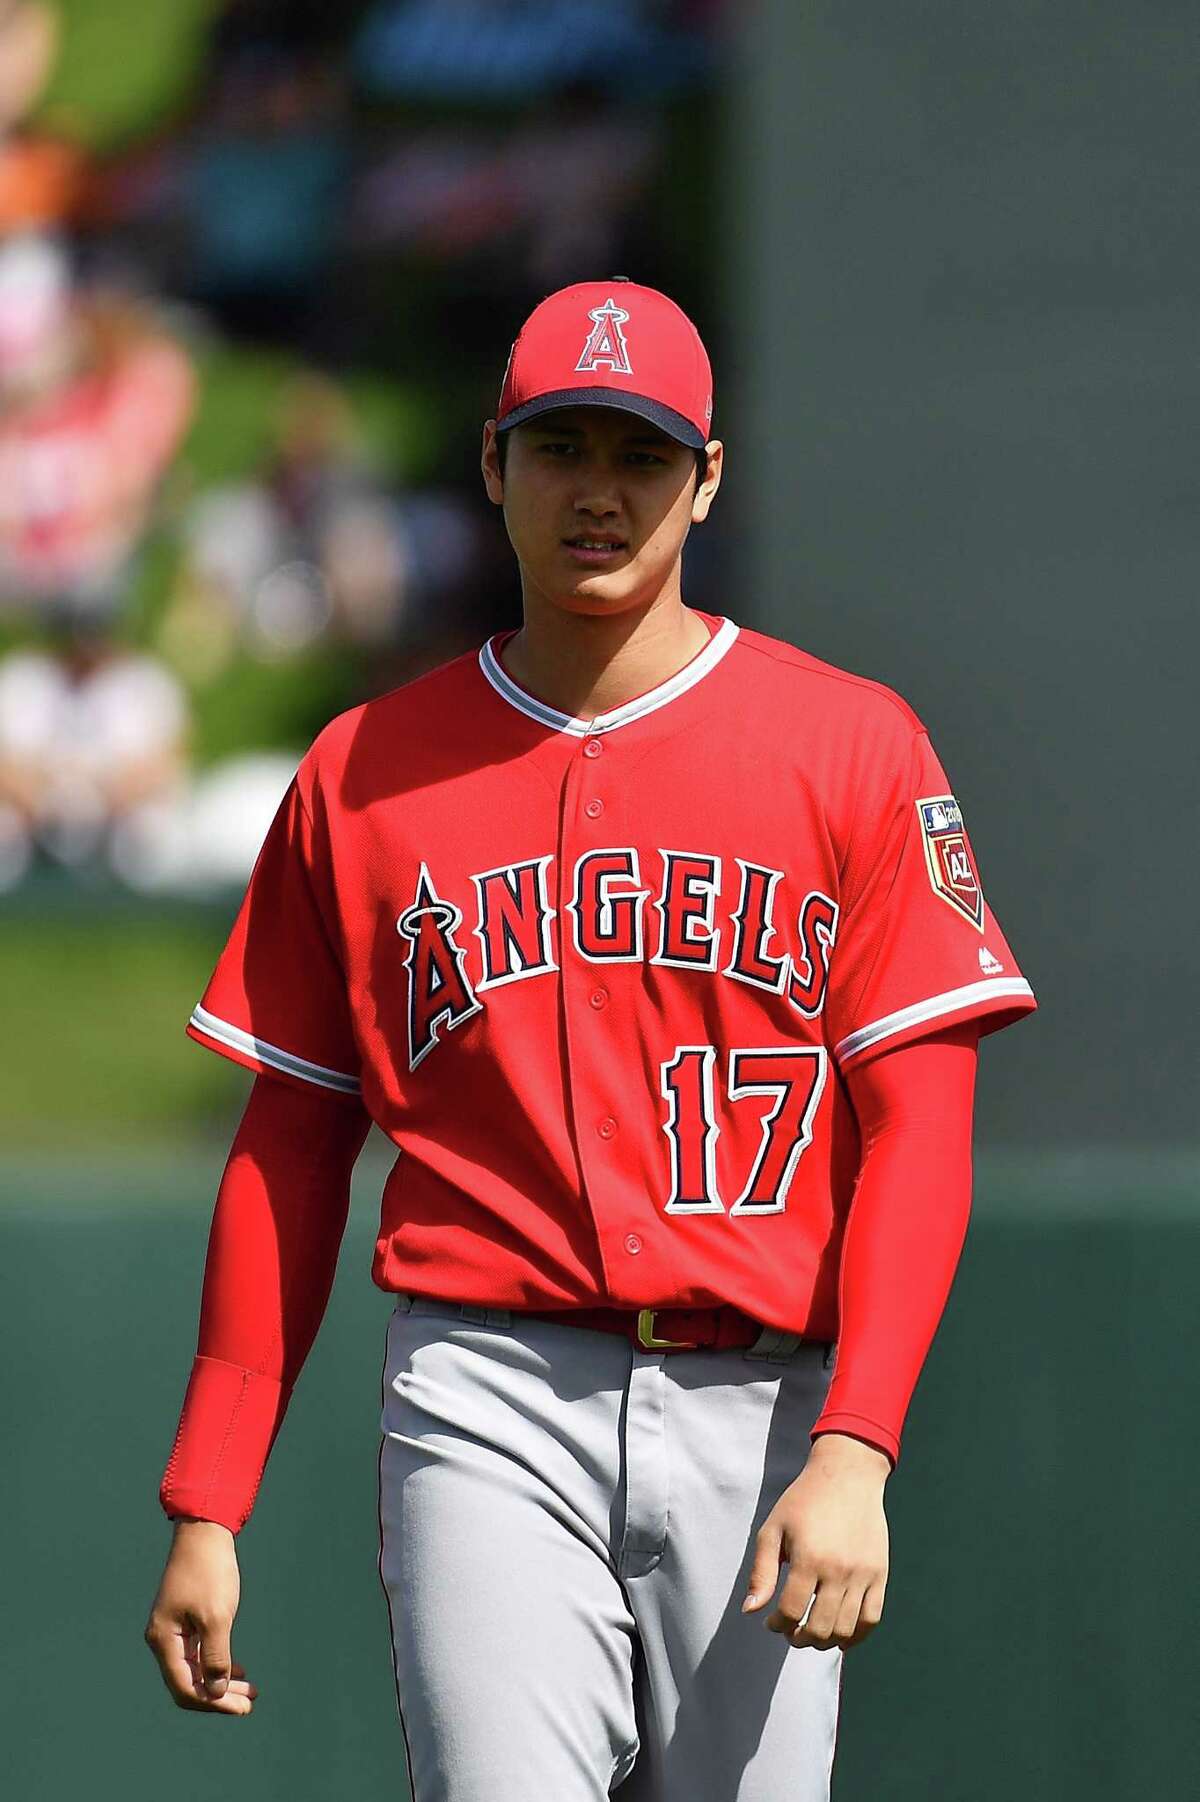 All eyes on Ohtani, wherever he plays